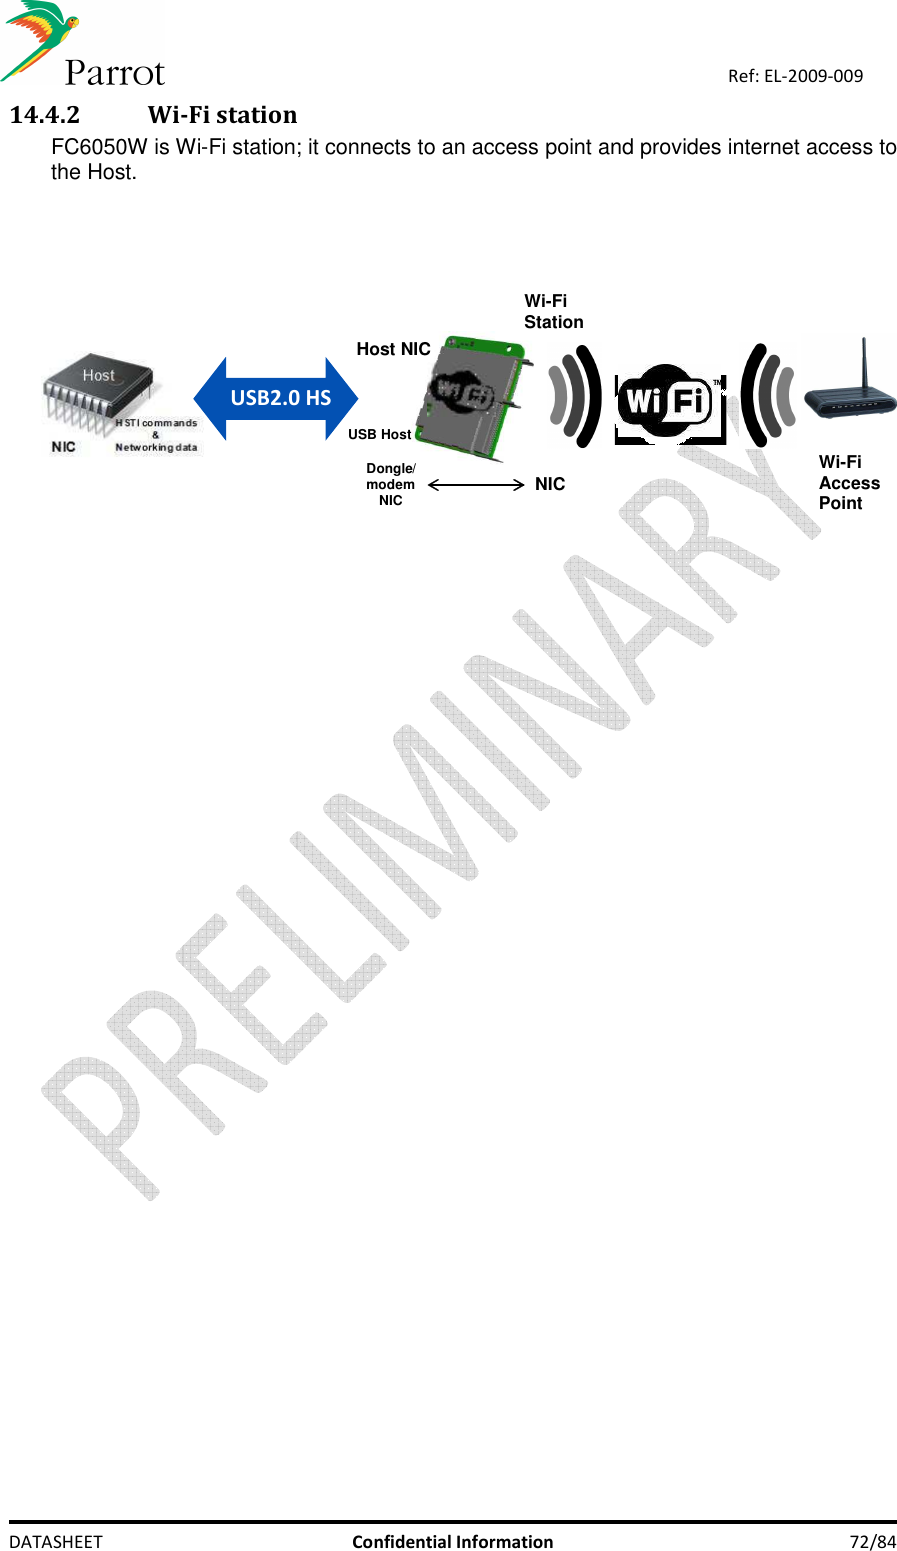    DATASHEET  Confidential Information  72/84 Ref: EL-2009-009 14.4.2 Wi-Fi station FC6050W is Wi-Fi station; it connects to an access point and provides internet access to the Host.    Wi-Fi Station USB HostHost Dongle/modem NIC NIC Host NIC Wi-Fi  Access Point USB2.0 HS 